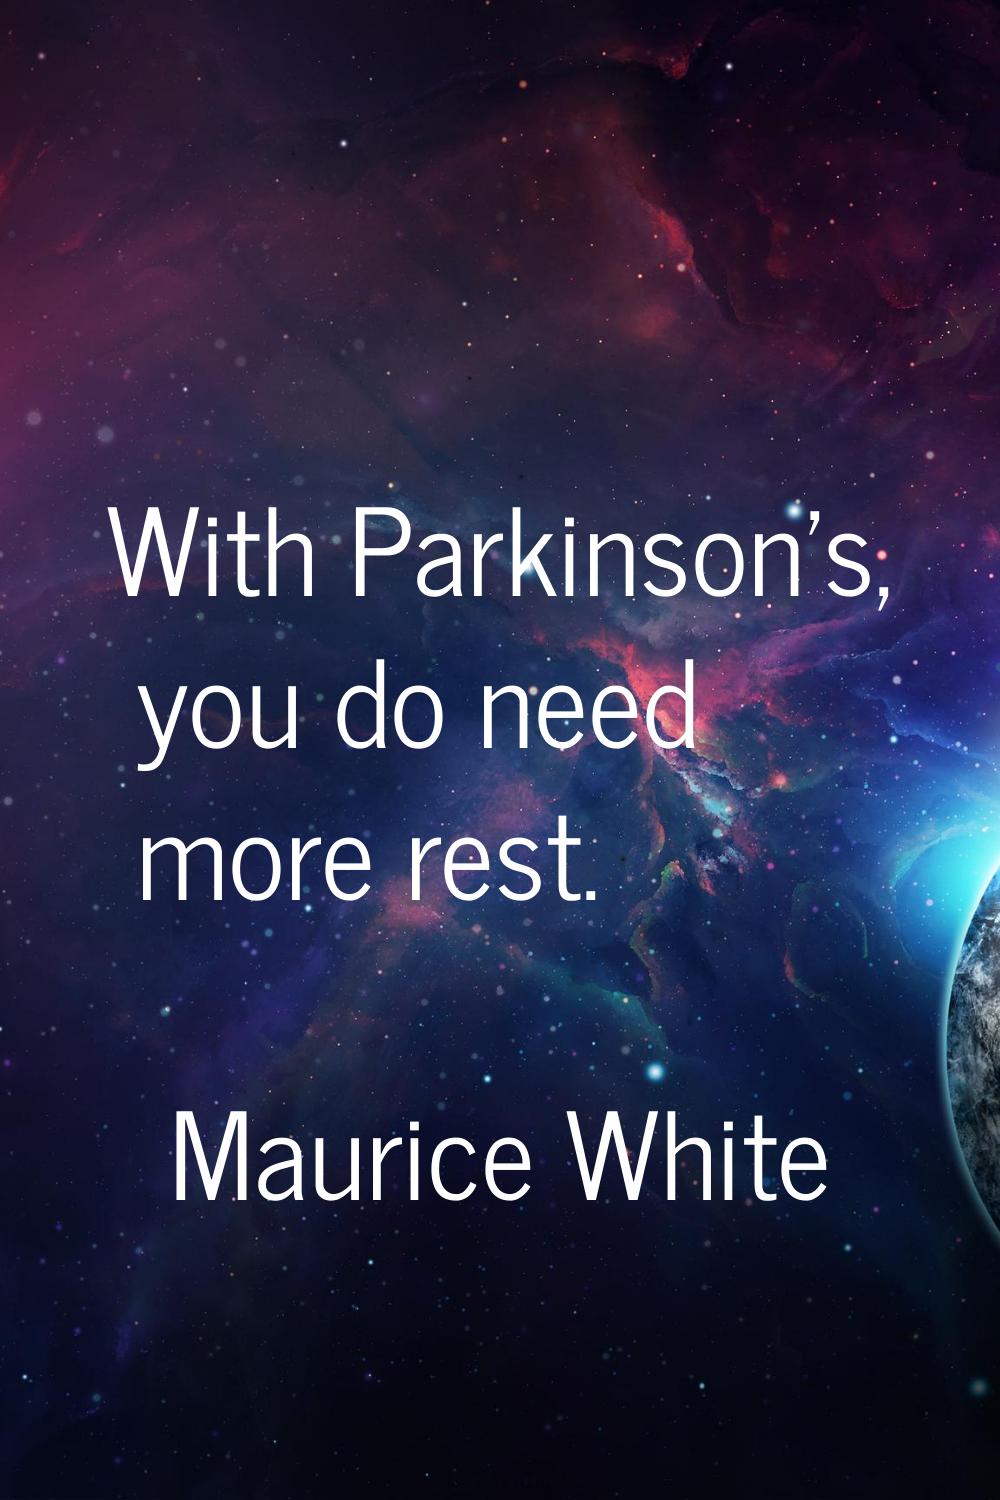 With Parkinson's, you do need more rest.